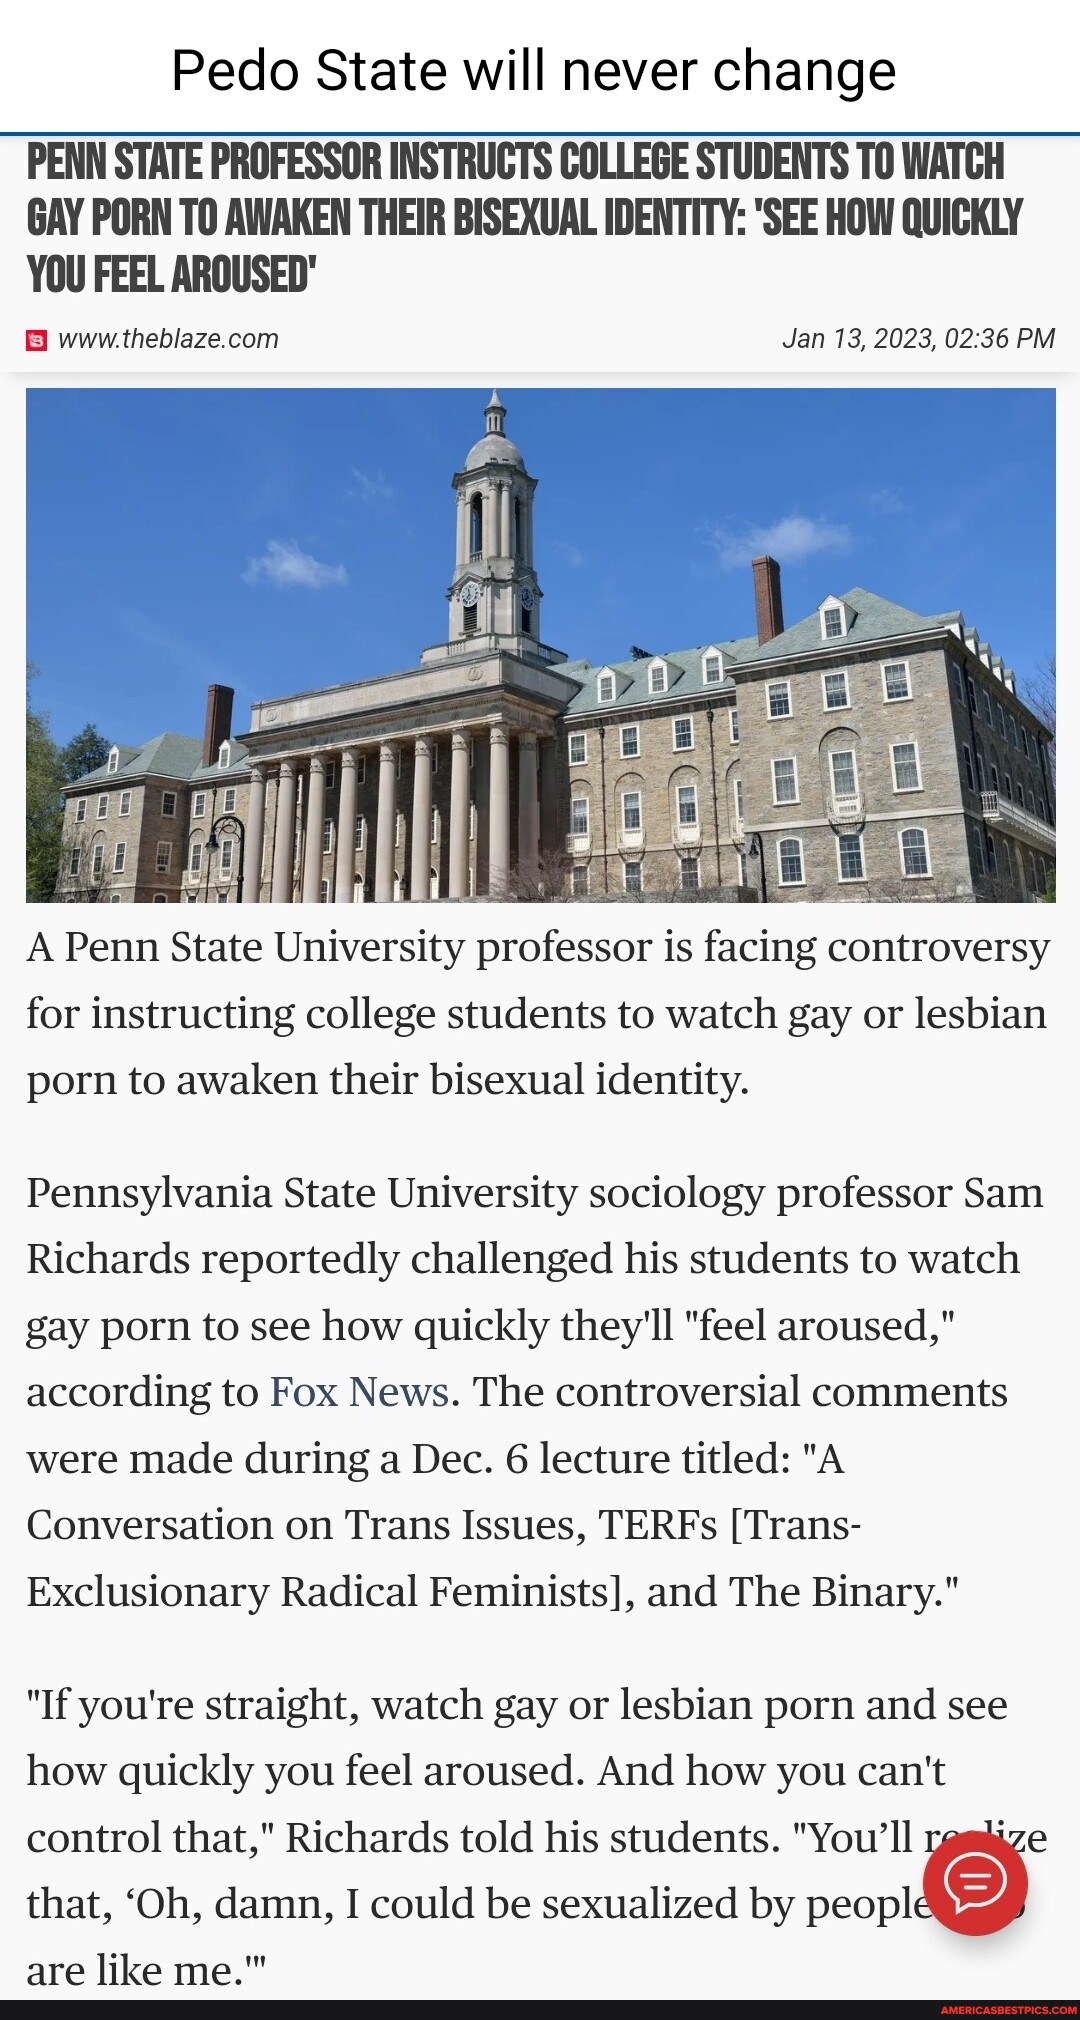 1080px x 2020px - Pedo State will never change PENN STATE PROFESSOR INSTRUCTS COLLEGE  STUDENTS TO WATCH GAY PORN TO